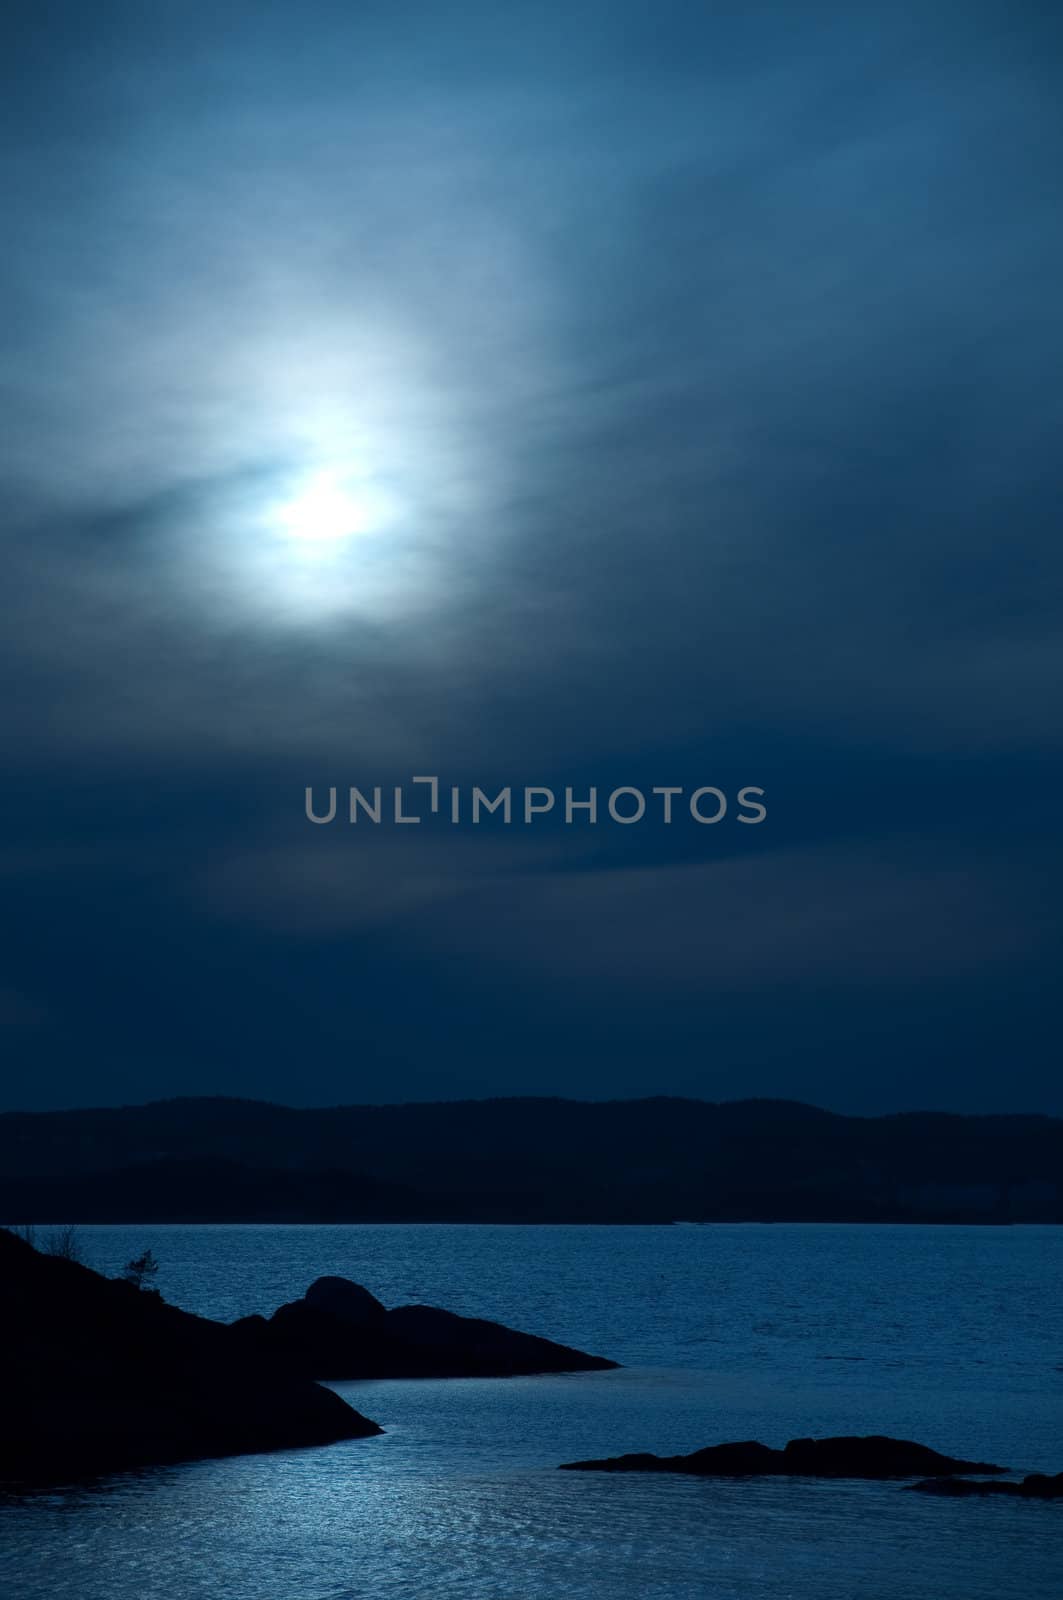 Ocean view in the moonlight by ThomasOderud